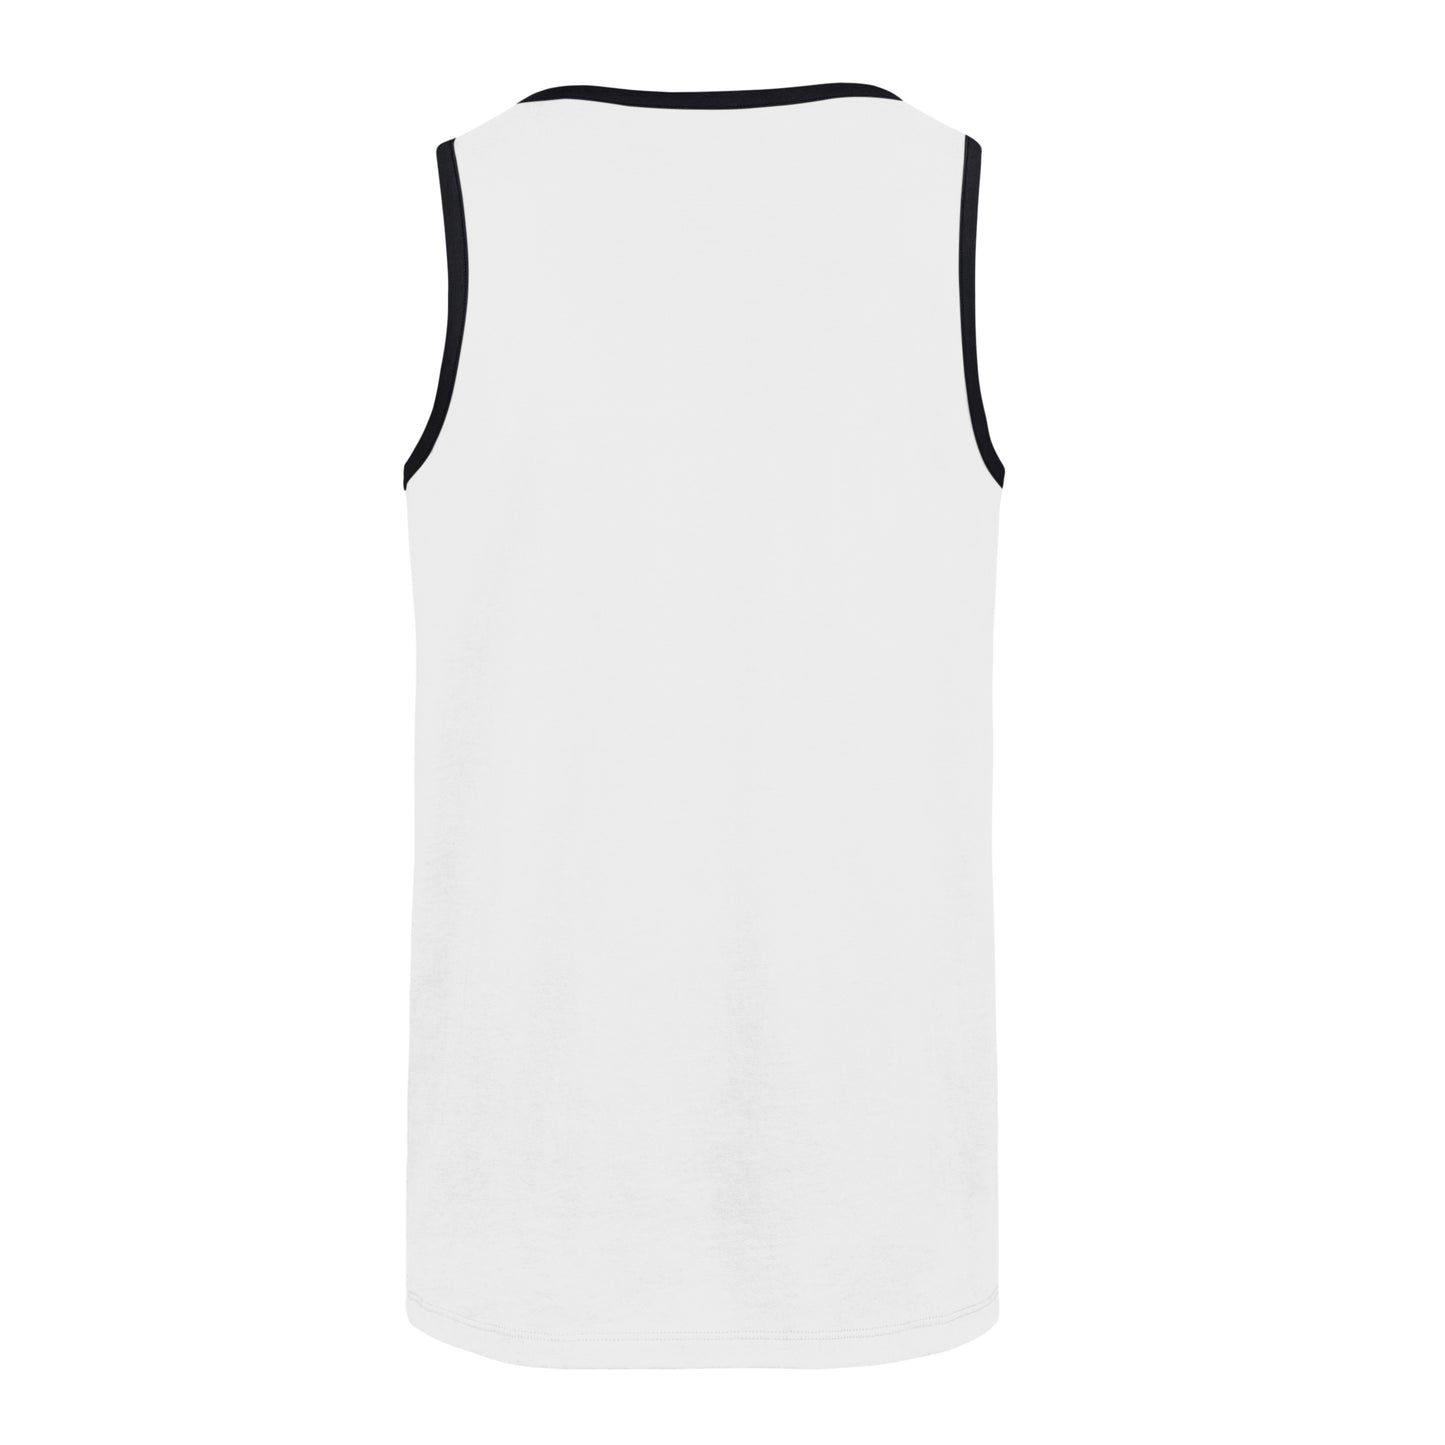 Chicago Cubs '47 Franklin White W Upload Tank Top